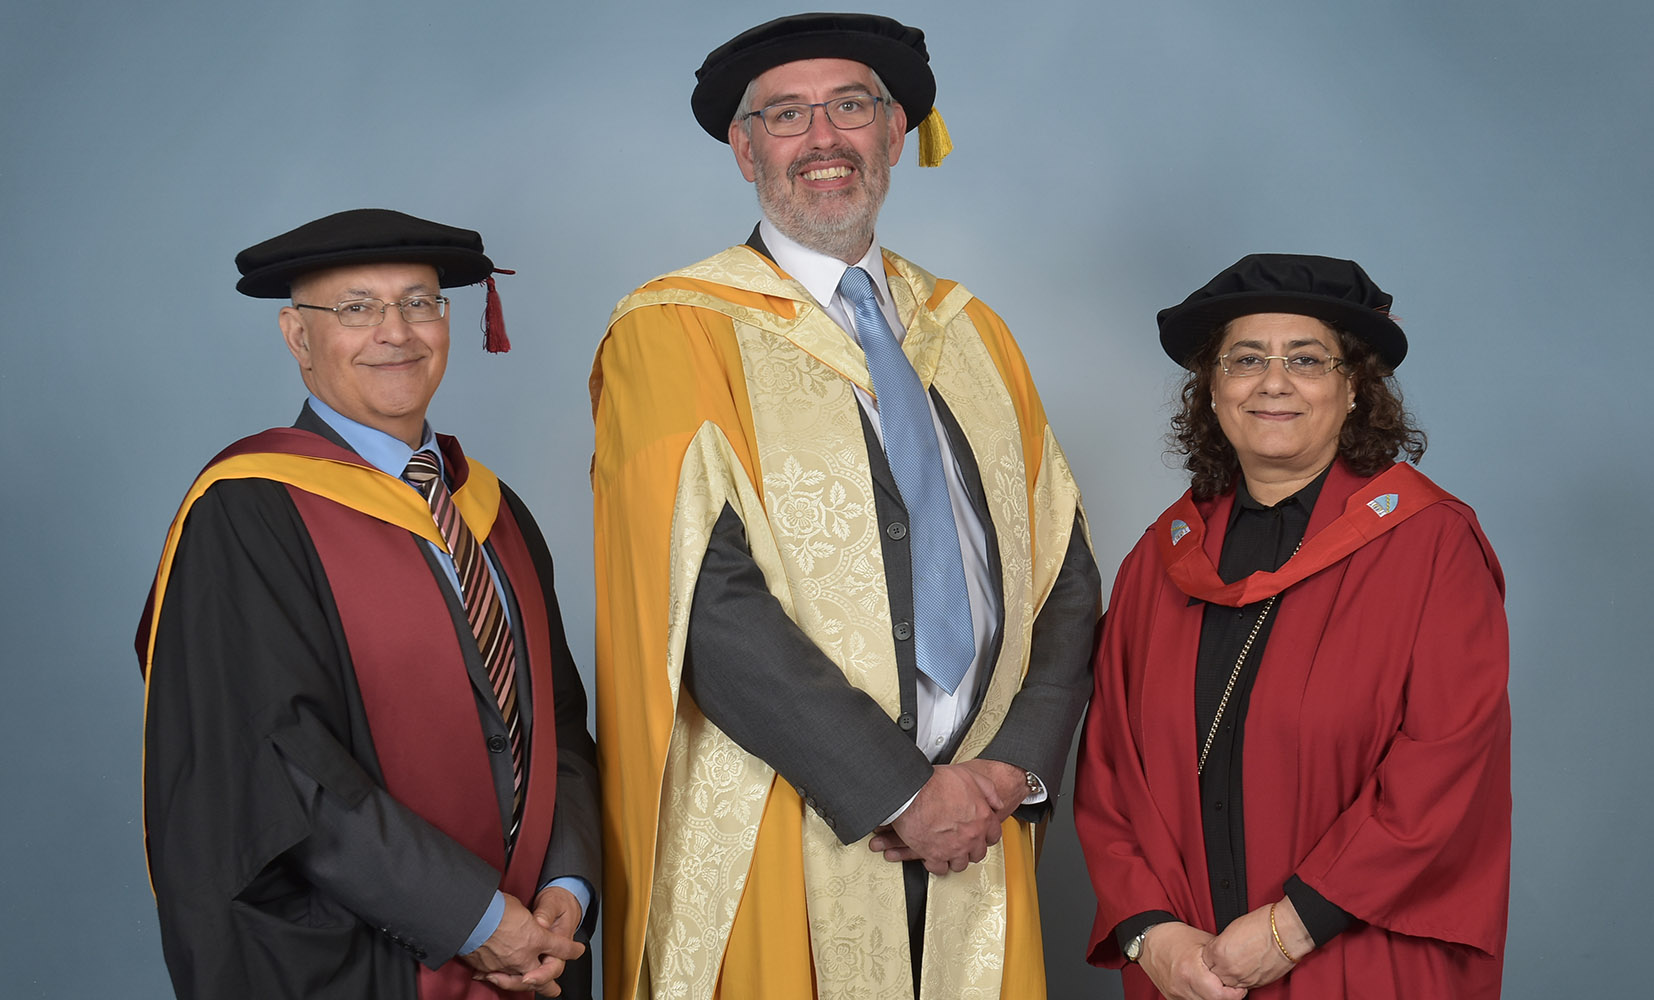 (l-r) Nasser Sherkat (Head of Engineering at Birmingham City University), Rowan Crozier (Brandauer) and Hanifa Shah (Pro Vice-Chancellor & Executive Dean of the Faculty of Computing, Engineering & the Built Environment at Birmingham City University)